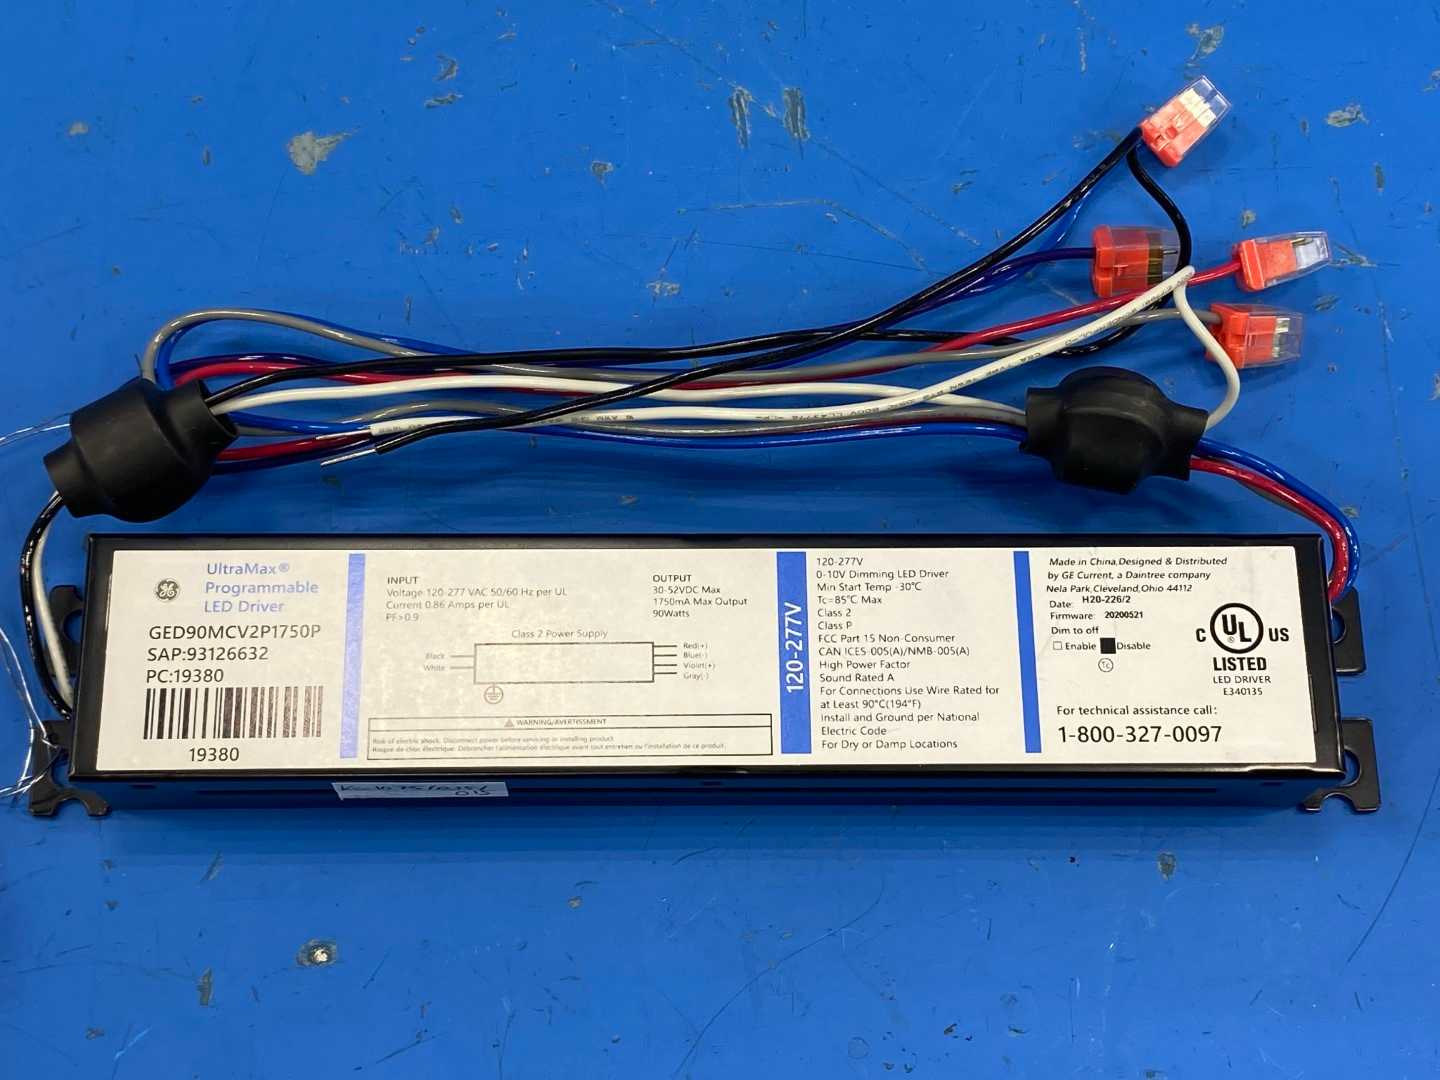 GE UltraMax Programmable LED Driver GED90MCV2P1750P 93126632